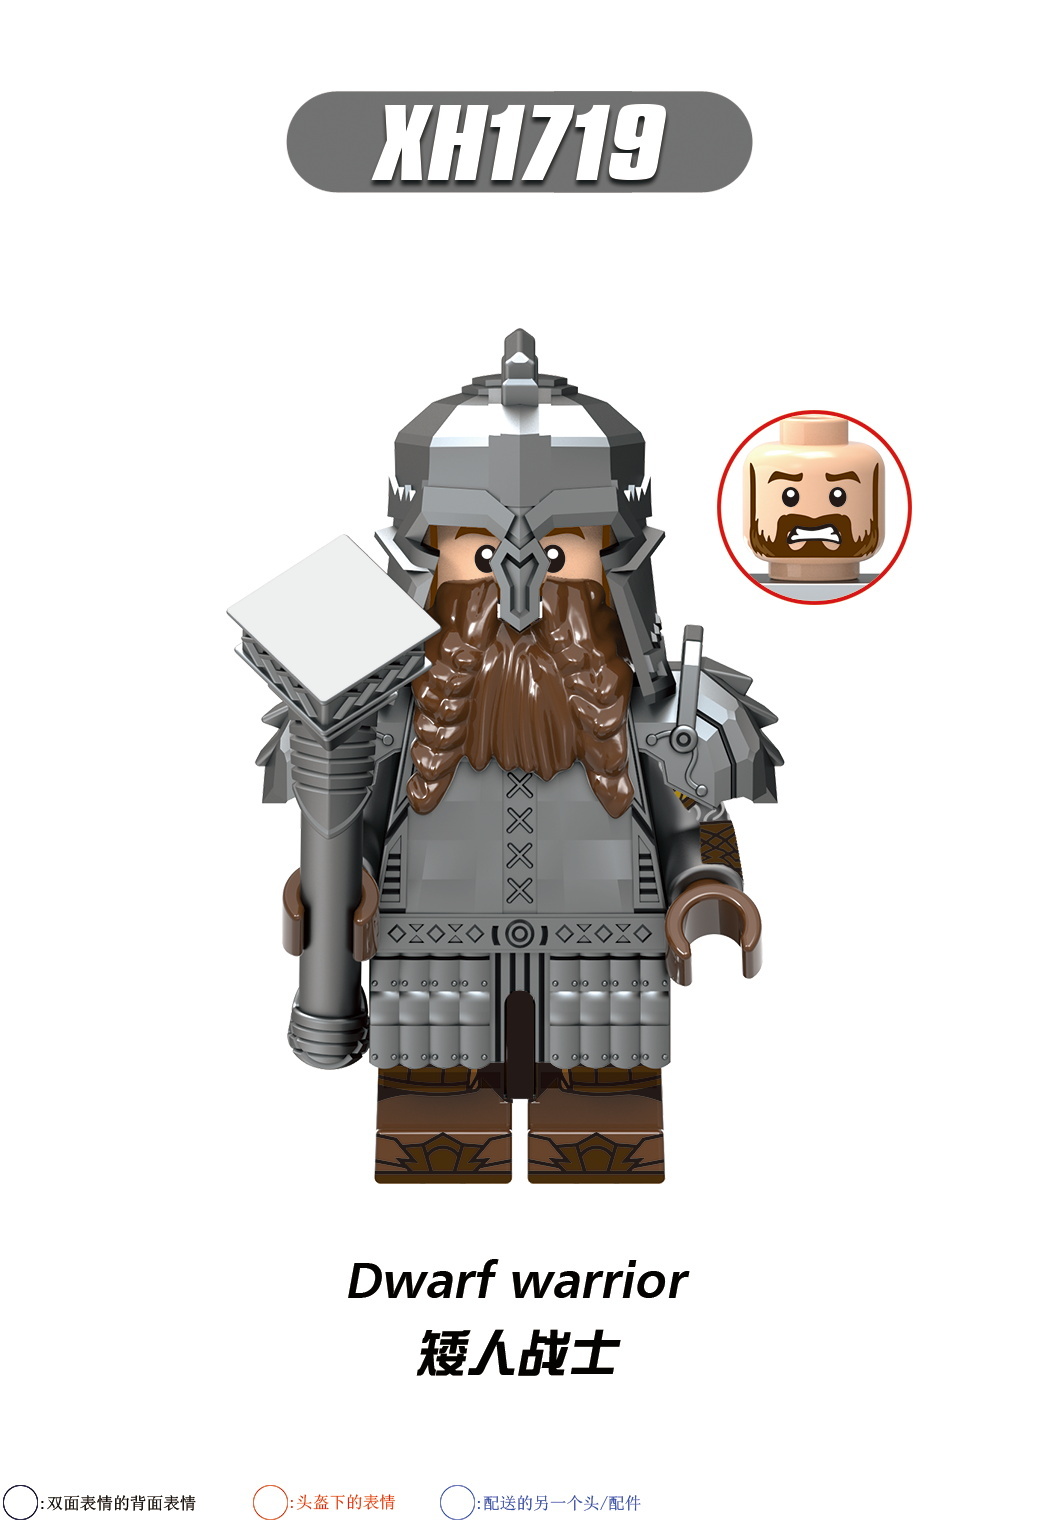 XH1714 1715 1716 1717 1718 1719 1720 1721 X0314 Warcraft Bricks Building Blocks Dwarf Warrior Movie Series Characters Action Figures Educational Toys For Children's Gifts